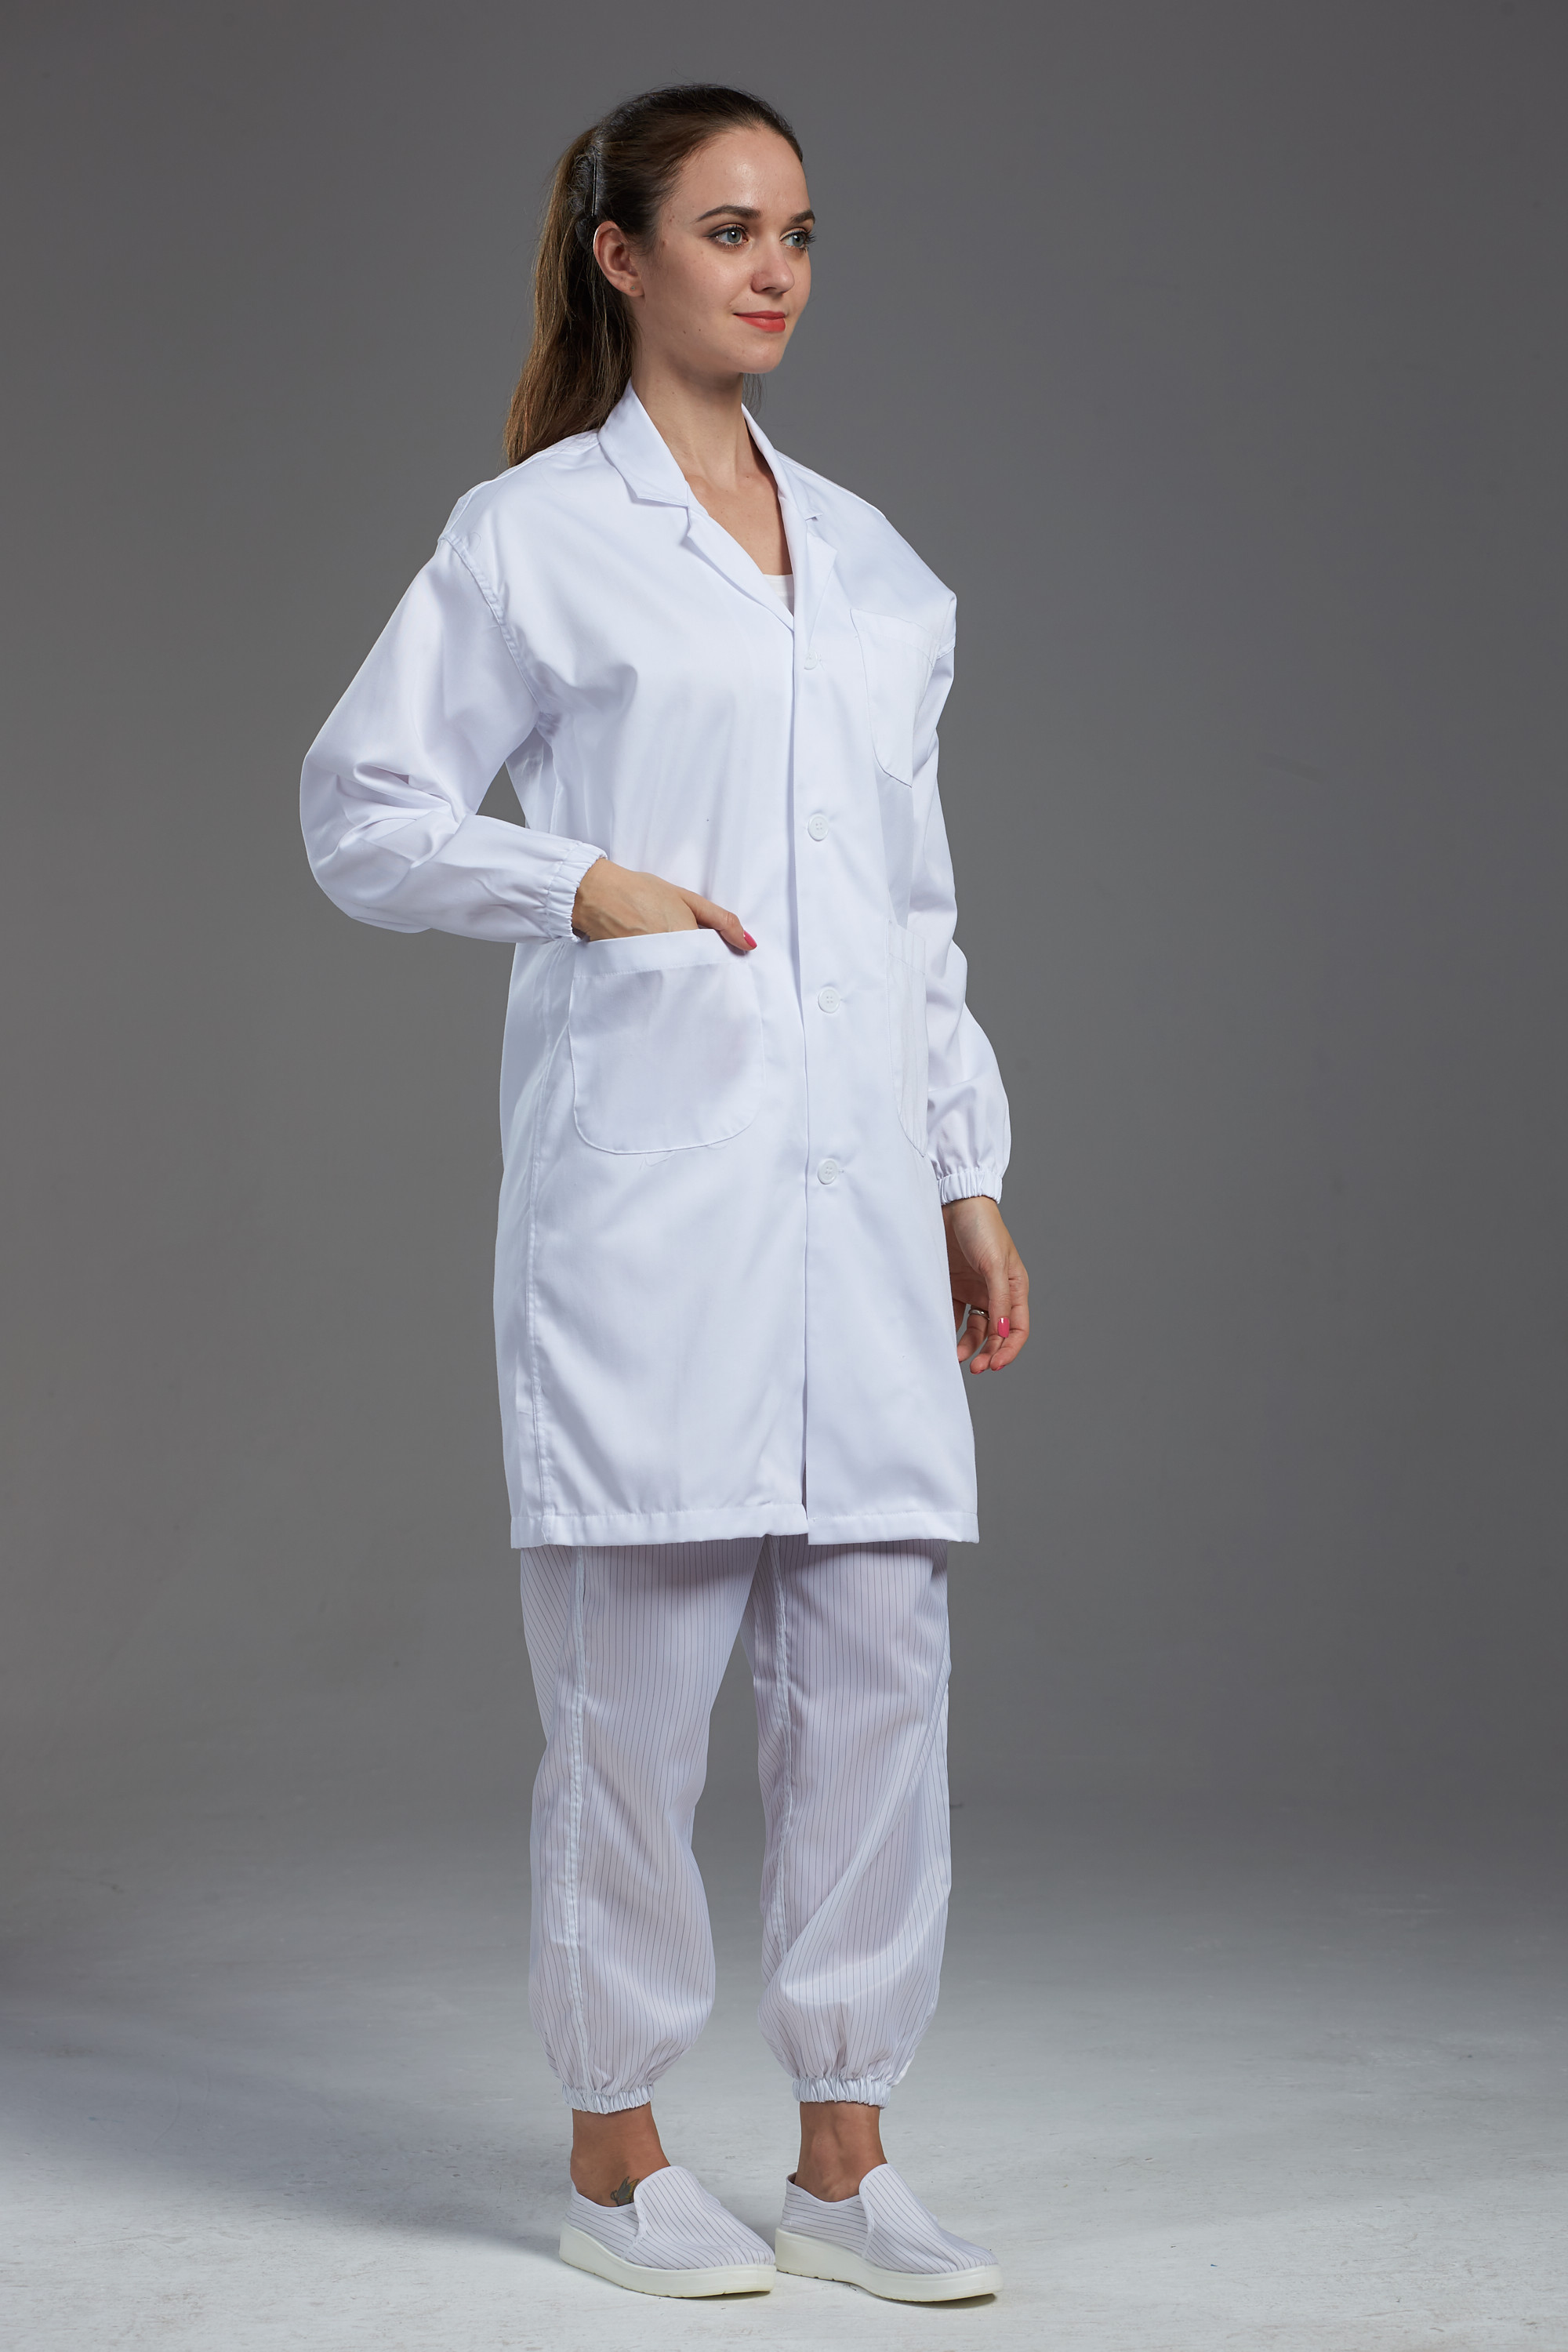 Best Anti Static Esd Food Processing Clothing With 10E7-10E11 Ohm Surface Resistance wholesale